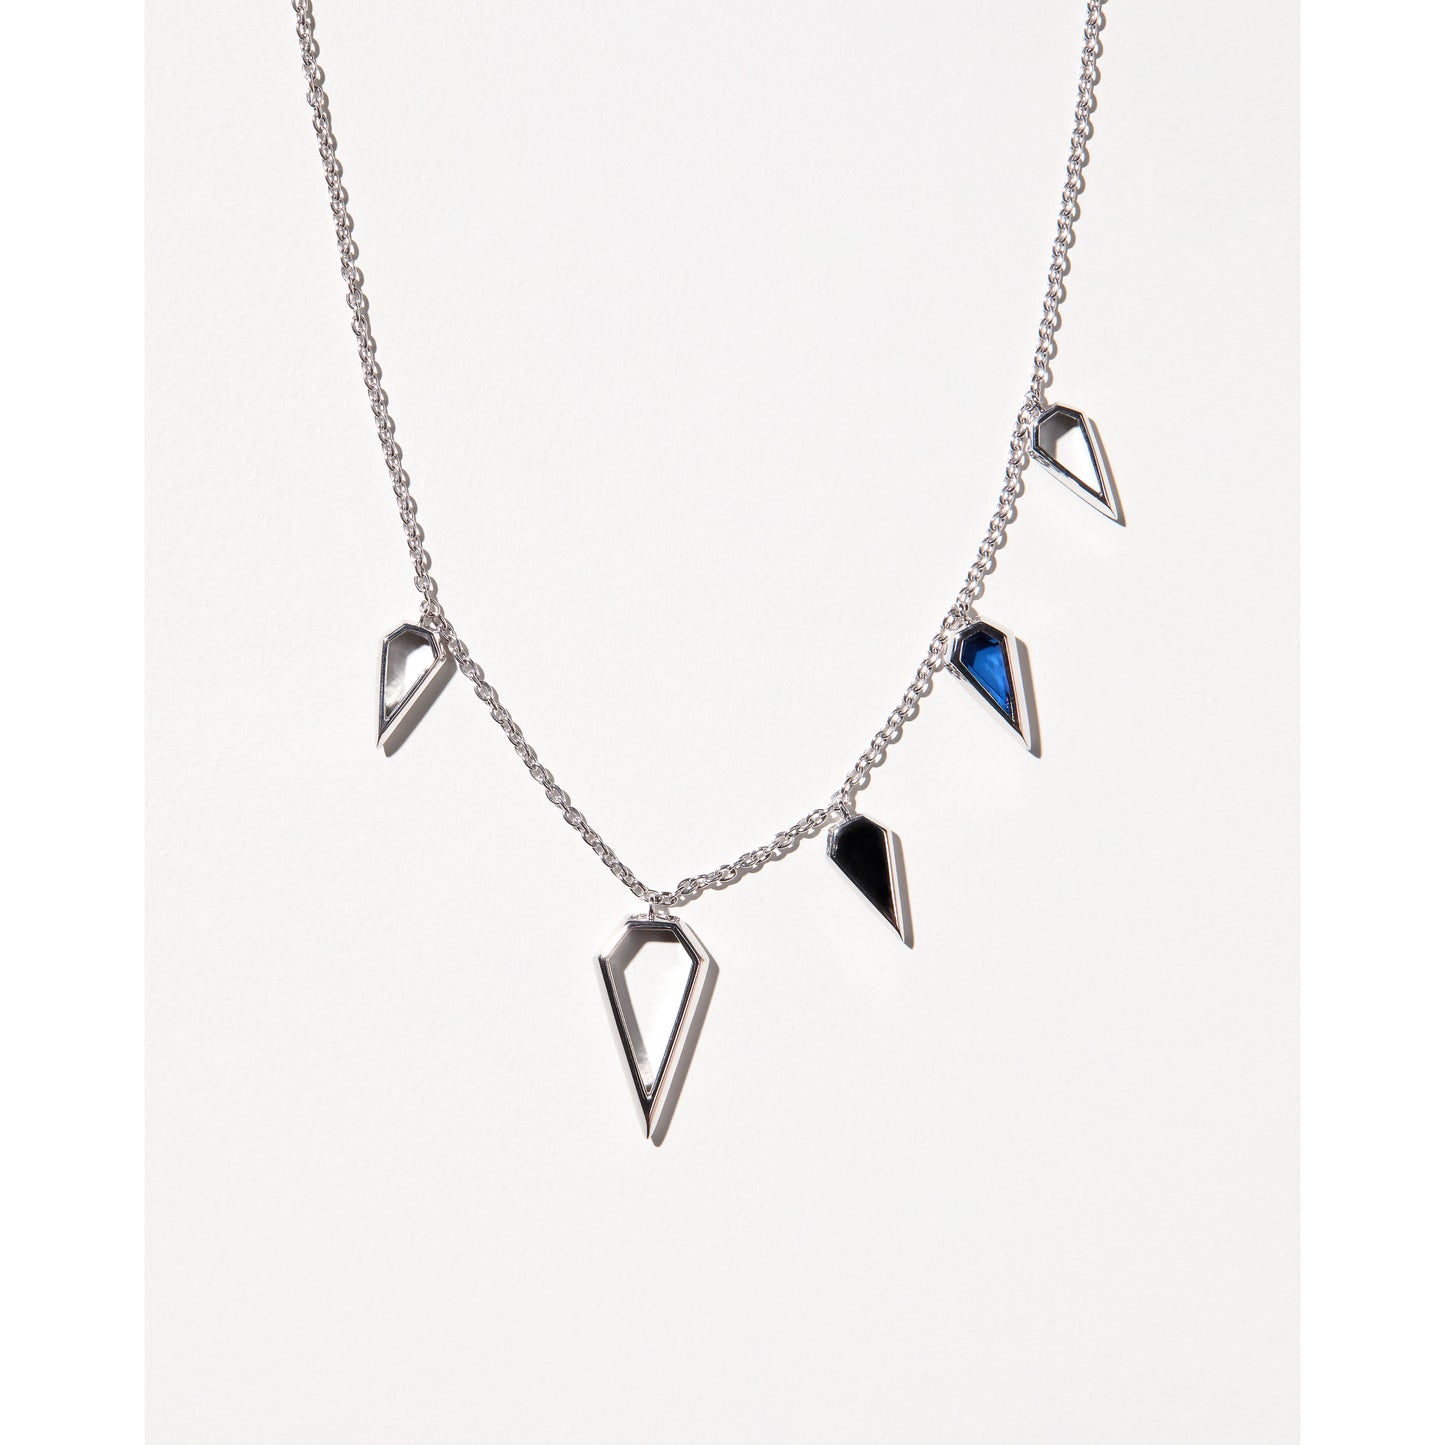 Spear Gem Necklace in Silver